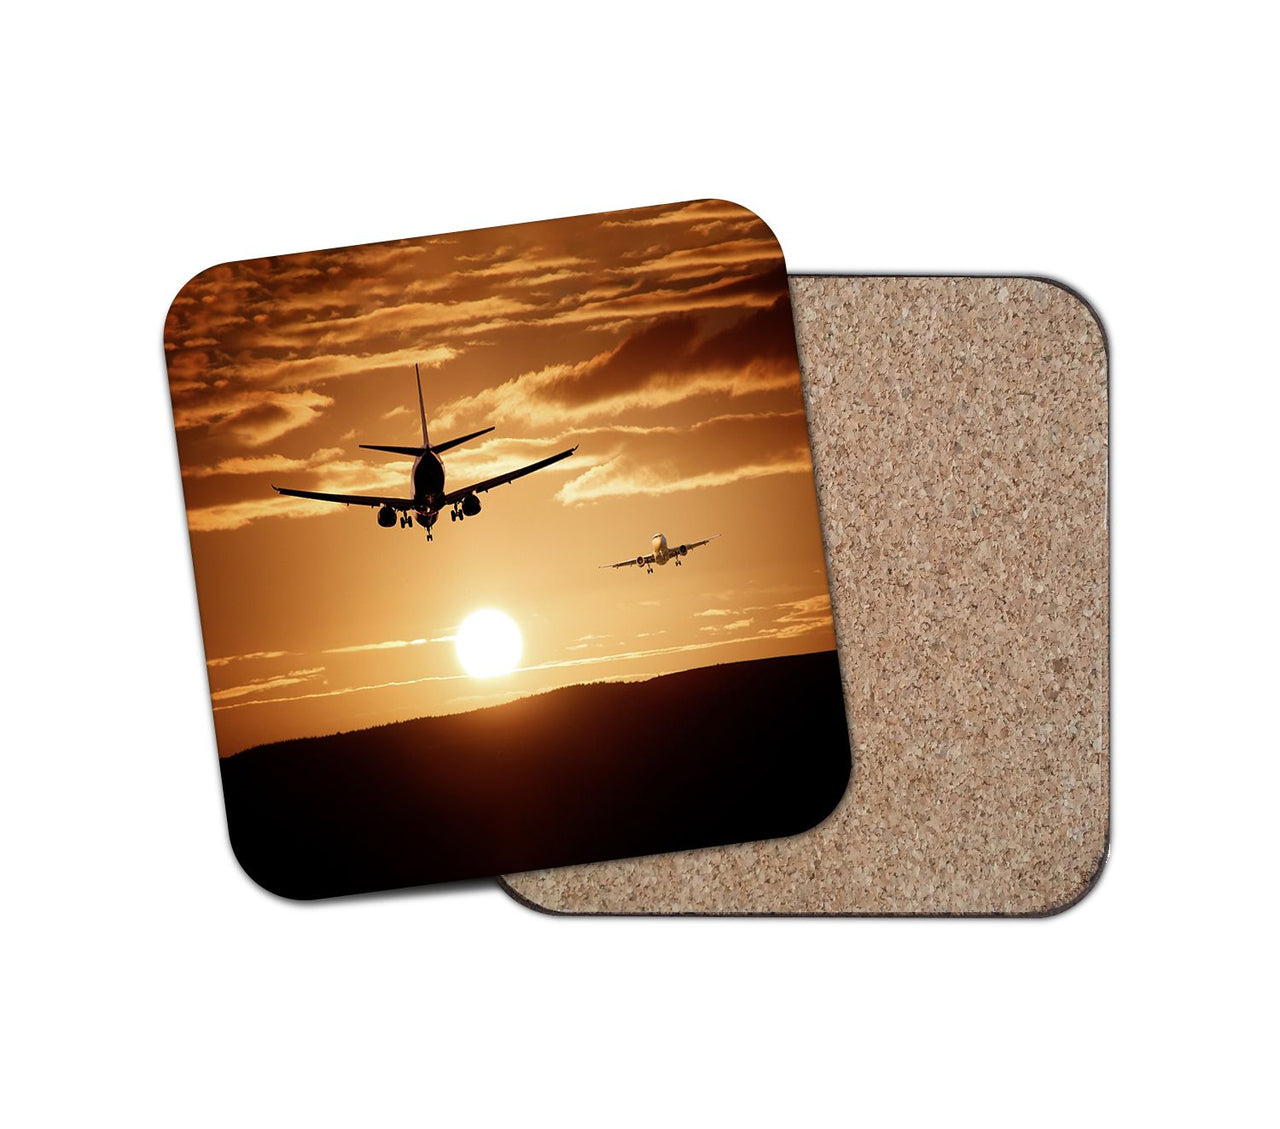 Two Aeroplanes During Sunset Designed Coasters